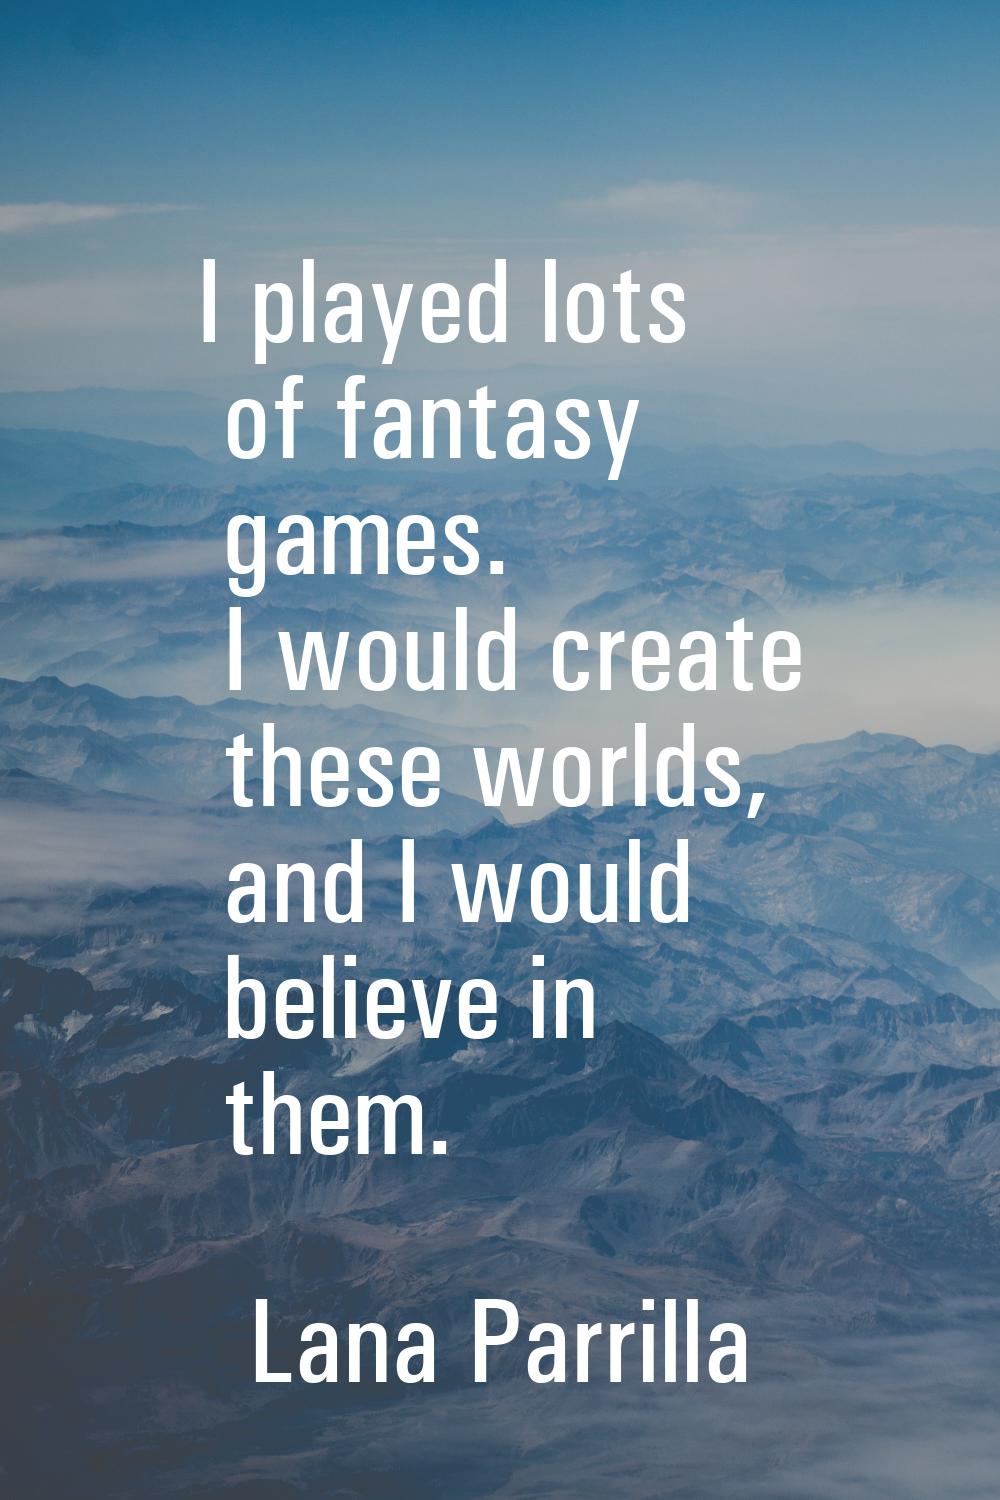 I played lots of fantasy games. I would create these worlds, and I would believe in them.